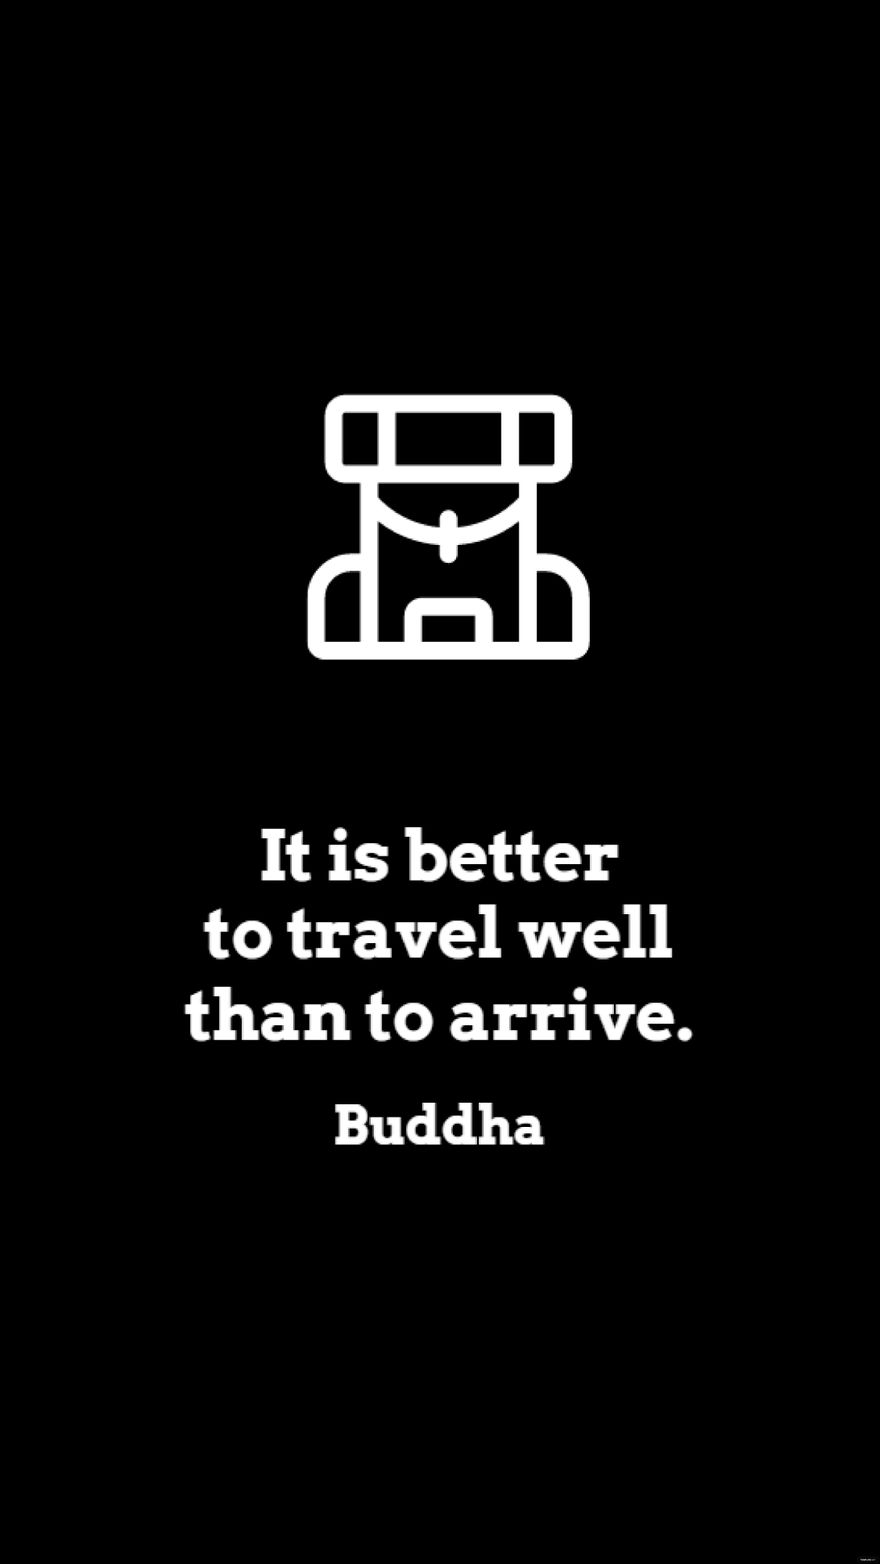 Buddha - It is better to travel well than to arrive. in JPG